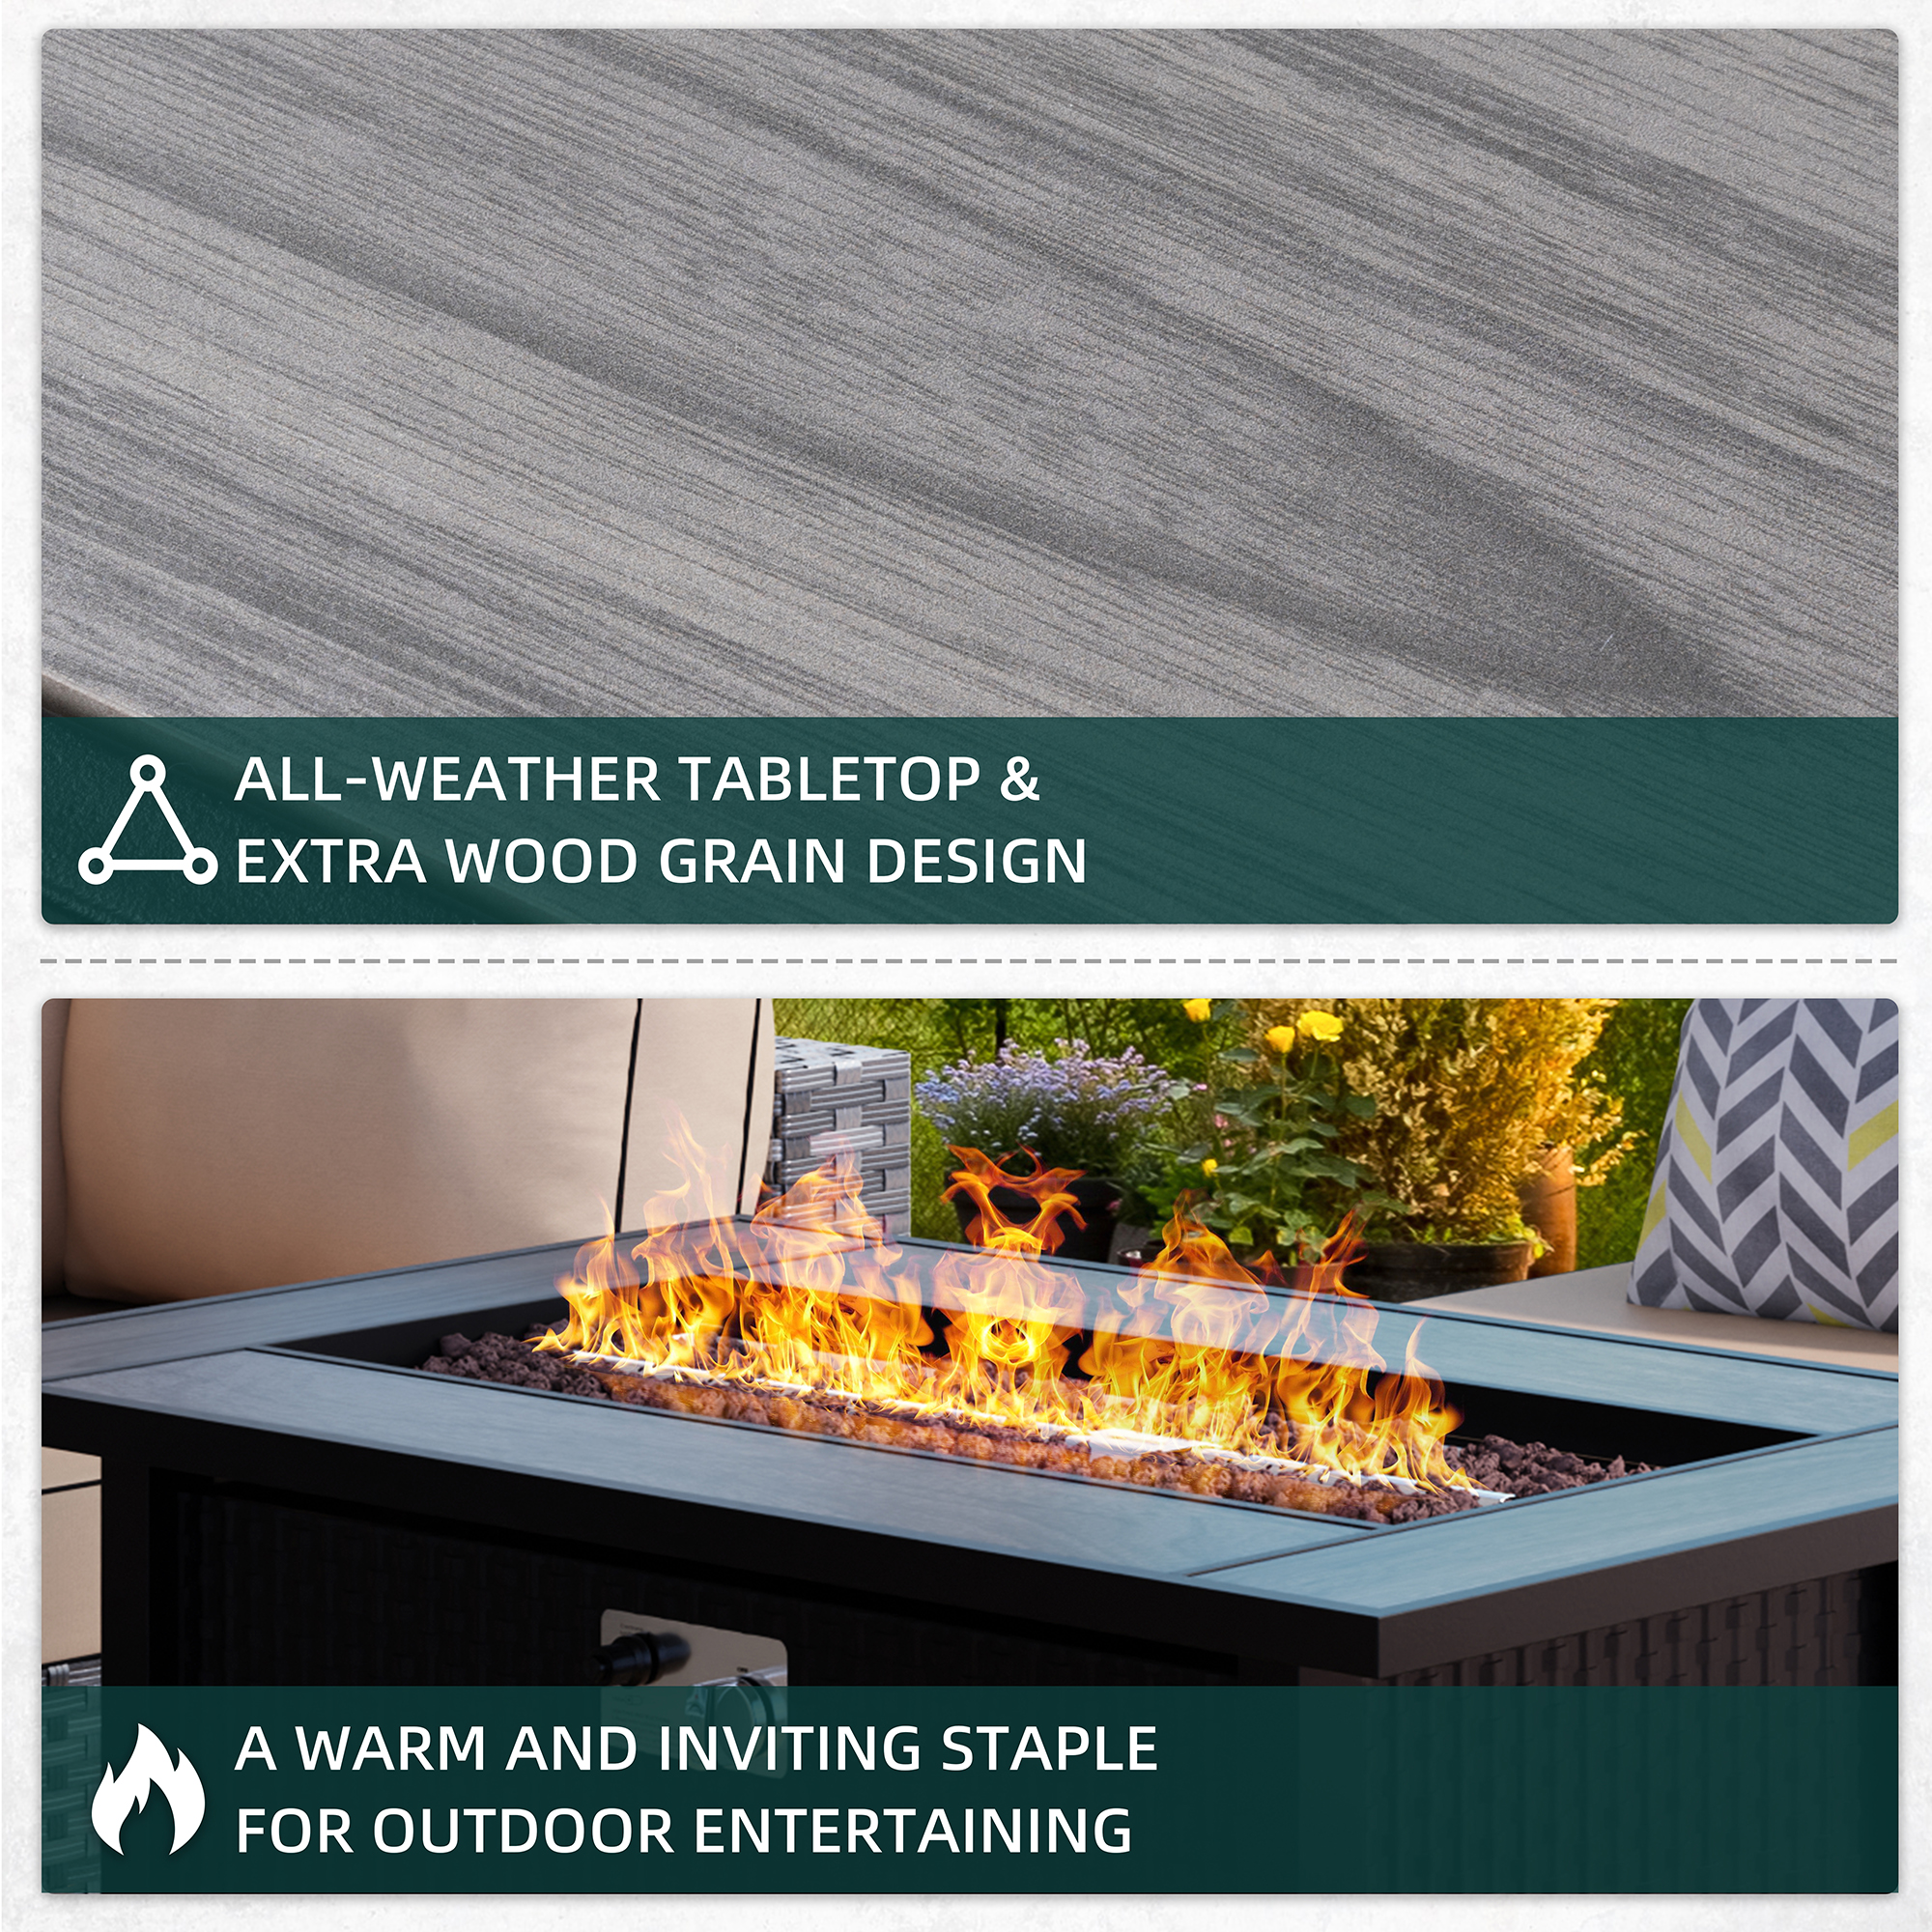 Walsunny 44.9" Gas Fire Pit Table 50000 BTU Propane with Removable Lid & Waterproof Cover with Lava Rock and Alumium Frame Tables(Grey) - image 2 of 8